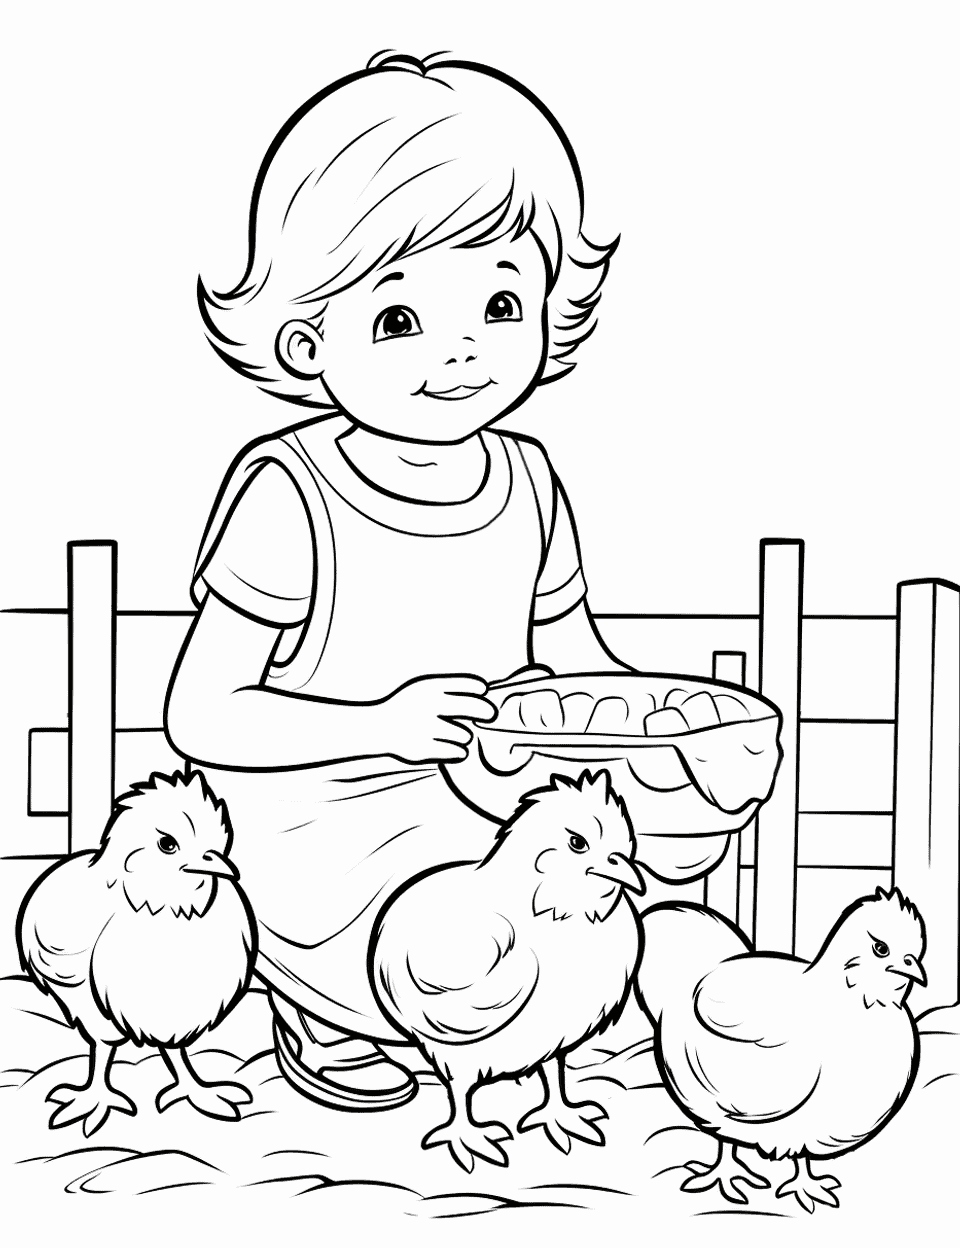 Caring for Chicks Farm Coloring Page - A child feeding chicks in a small pen.